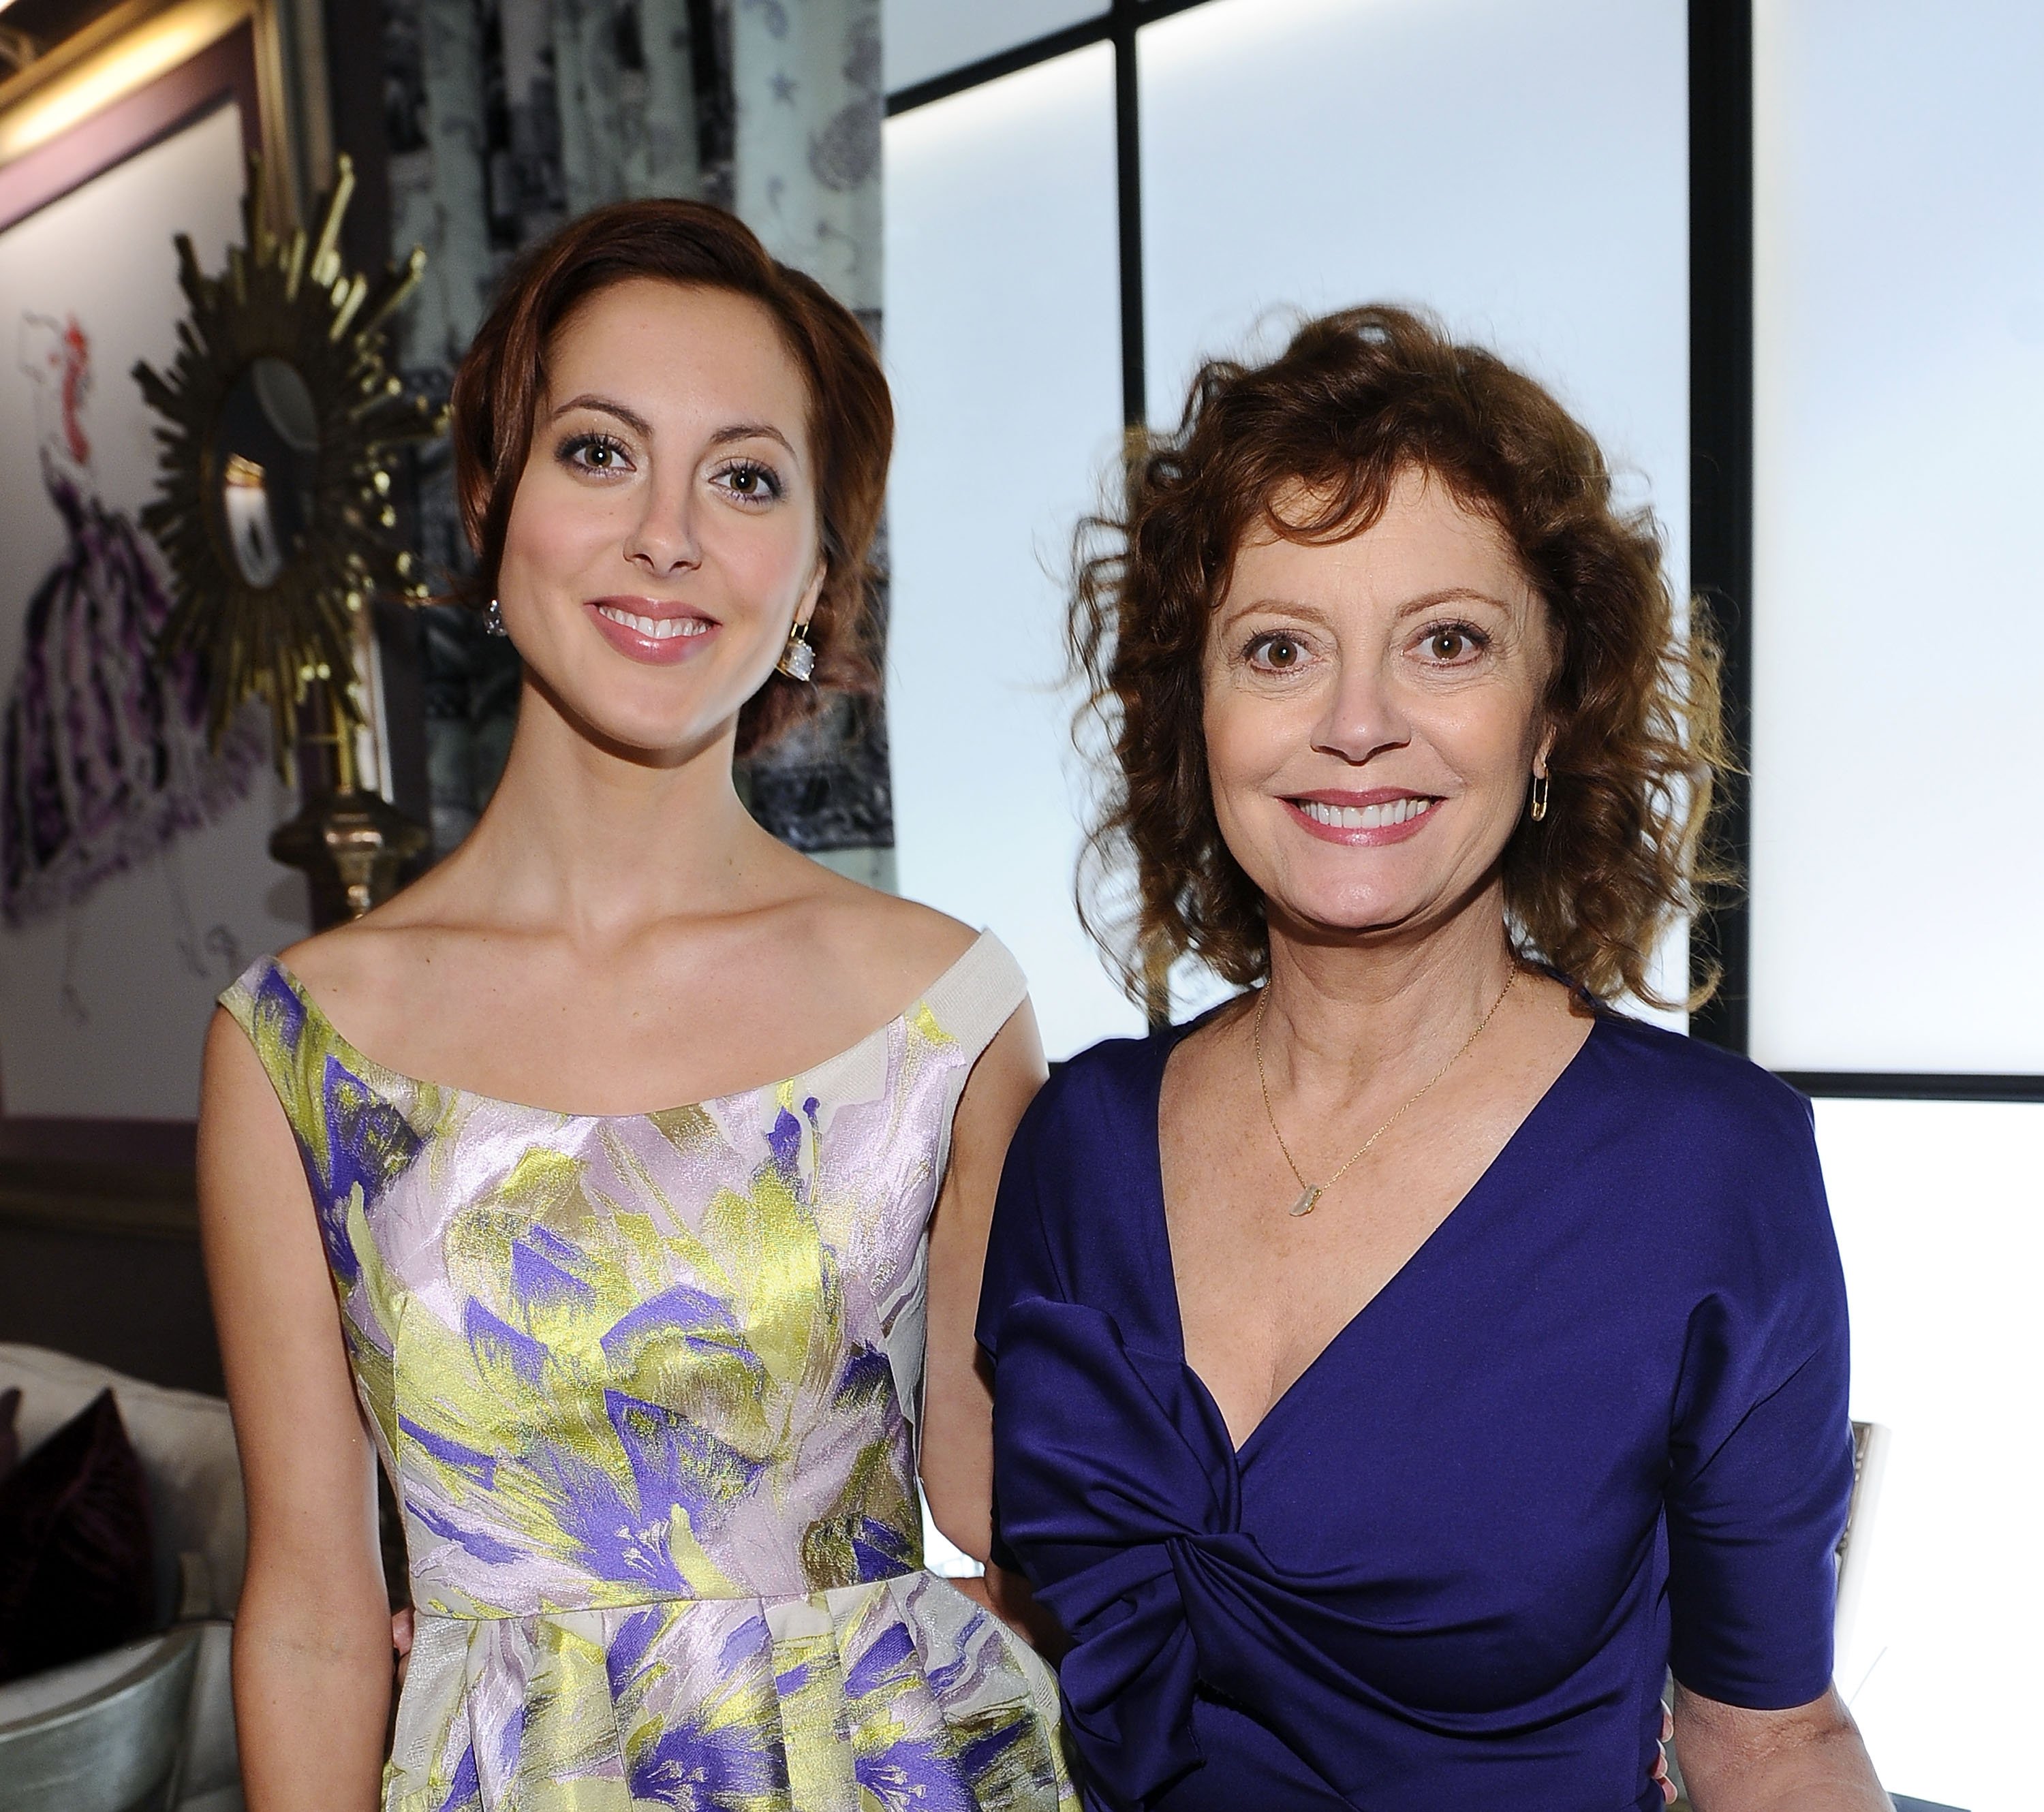 Actresses Eva Amurri and Susan Sarandon pose during Mercedes-Benz Fashion Week Spring 2012 at Lincoln Center on September 11, 2011 in New York City ┃Source: Getty Images